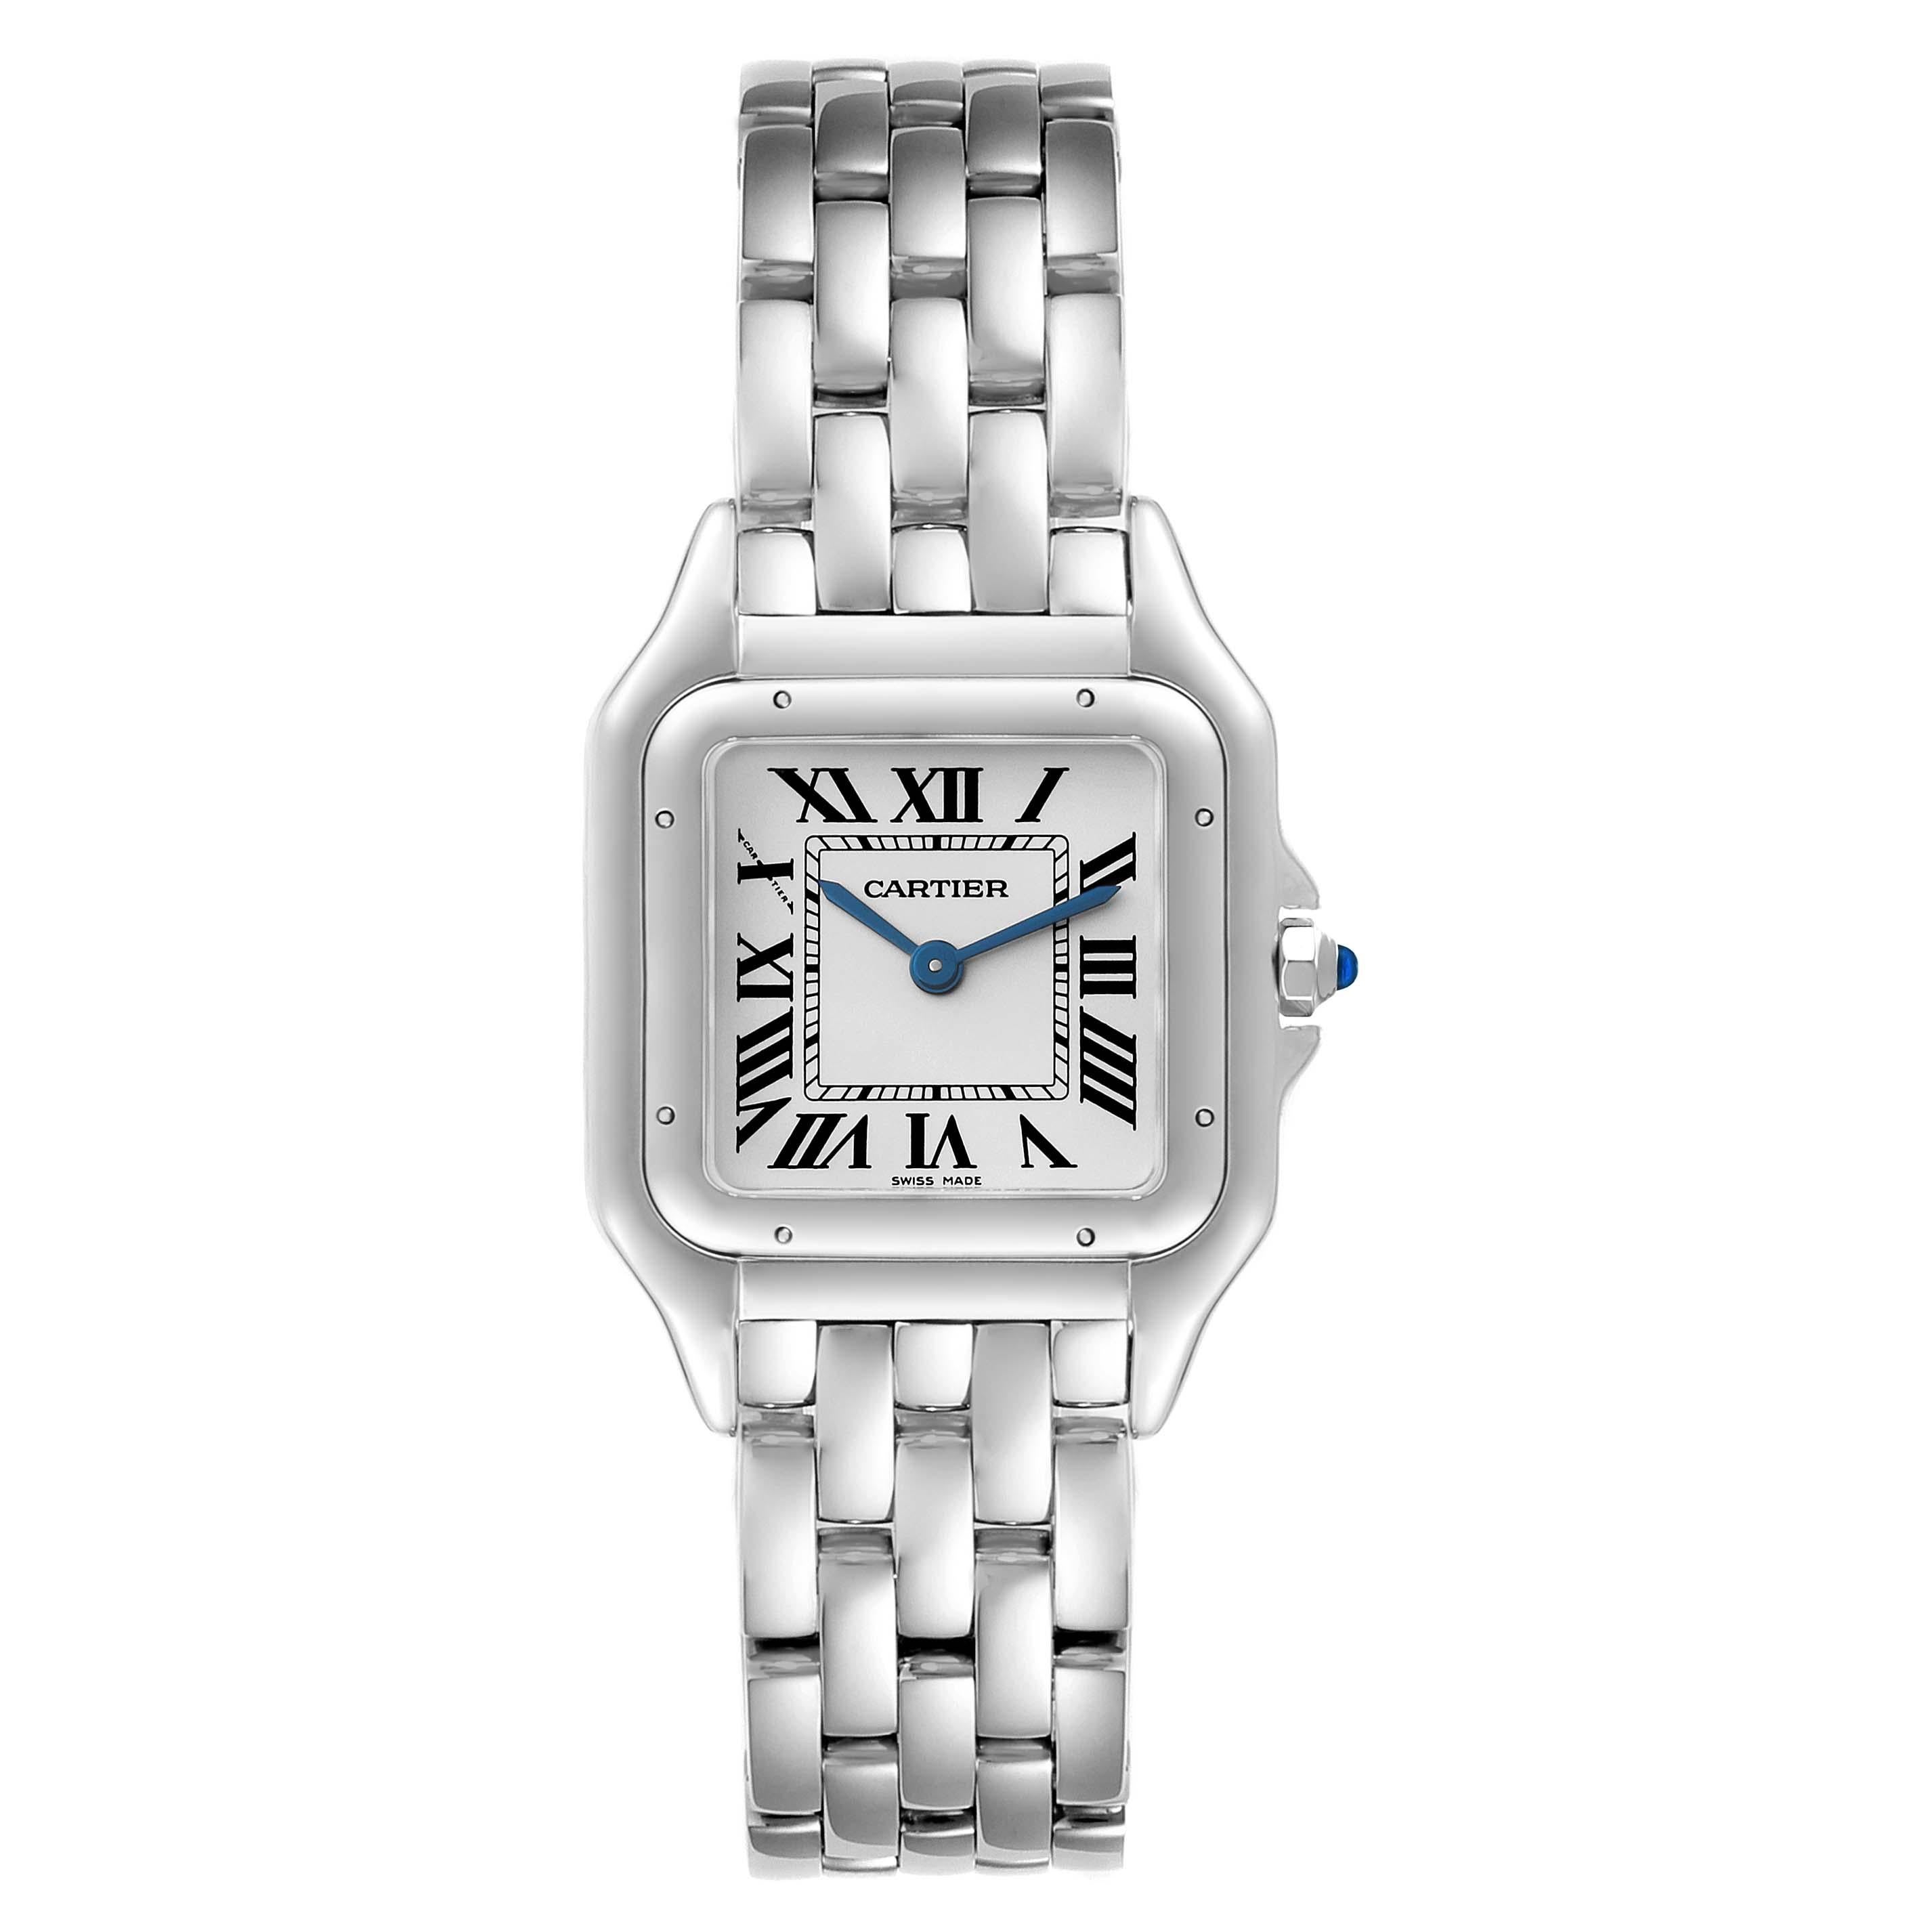 Cartier Panthere Midsize 27mm Steel Ladies Watch WSPN0007. Quartz movement. Stainless steel case 27 x 37 mm. Octagonal crown set with the blue spinel cabochon. . Scratch resistant sapphire crystal. Silver grained dial with black Roman numerals.